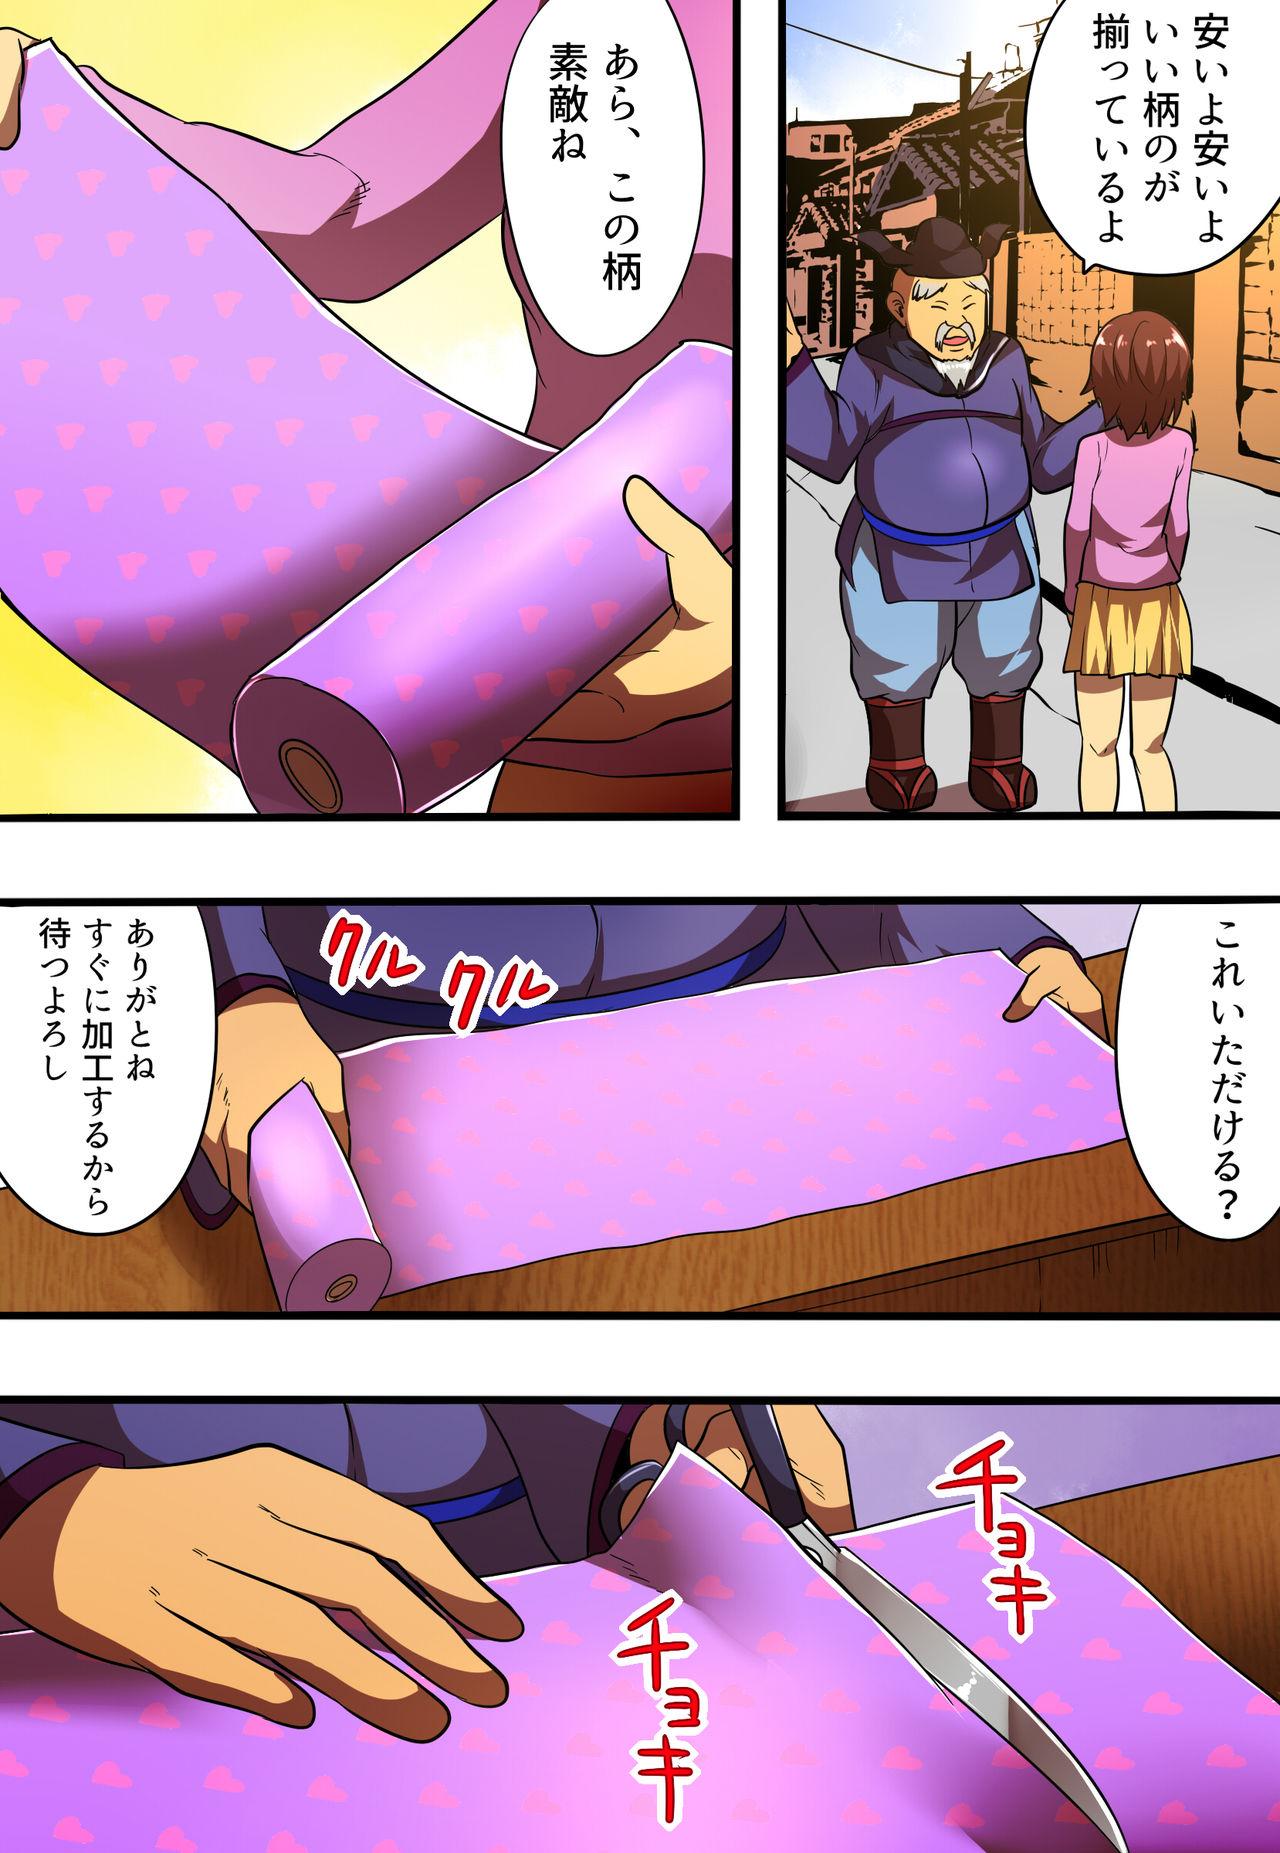 Orgasms shinenkan Comic of Textile-ification ghost storys Compilation - Page 6